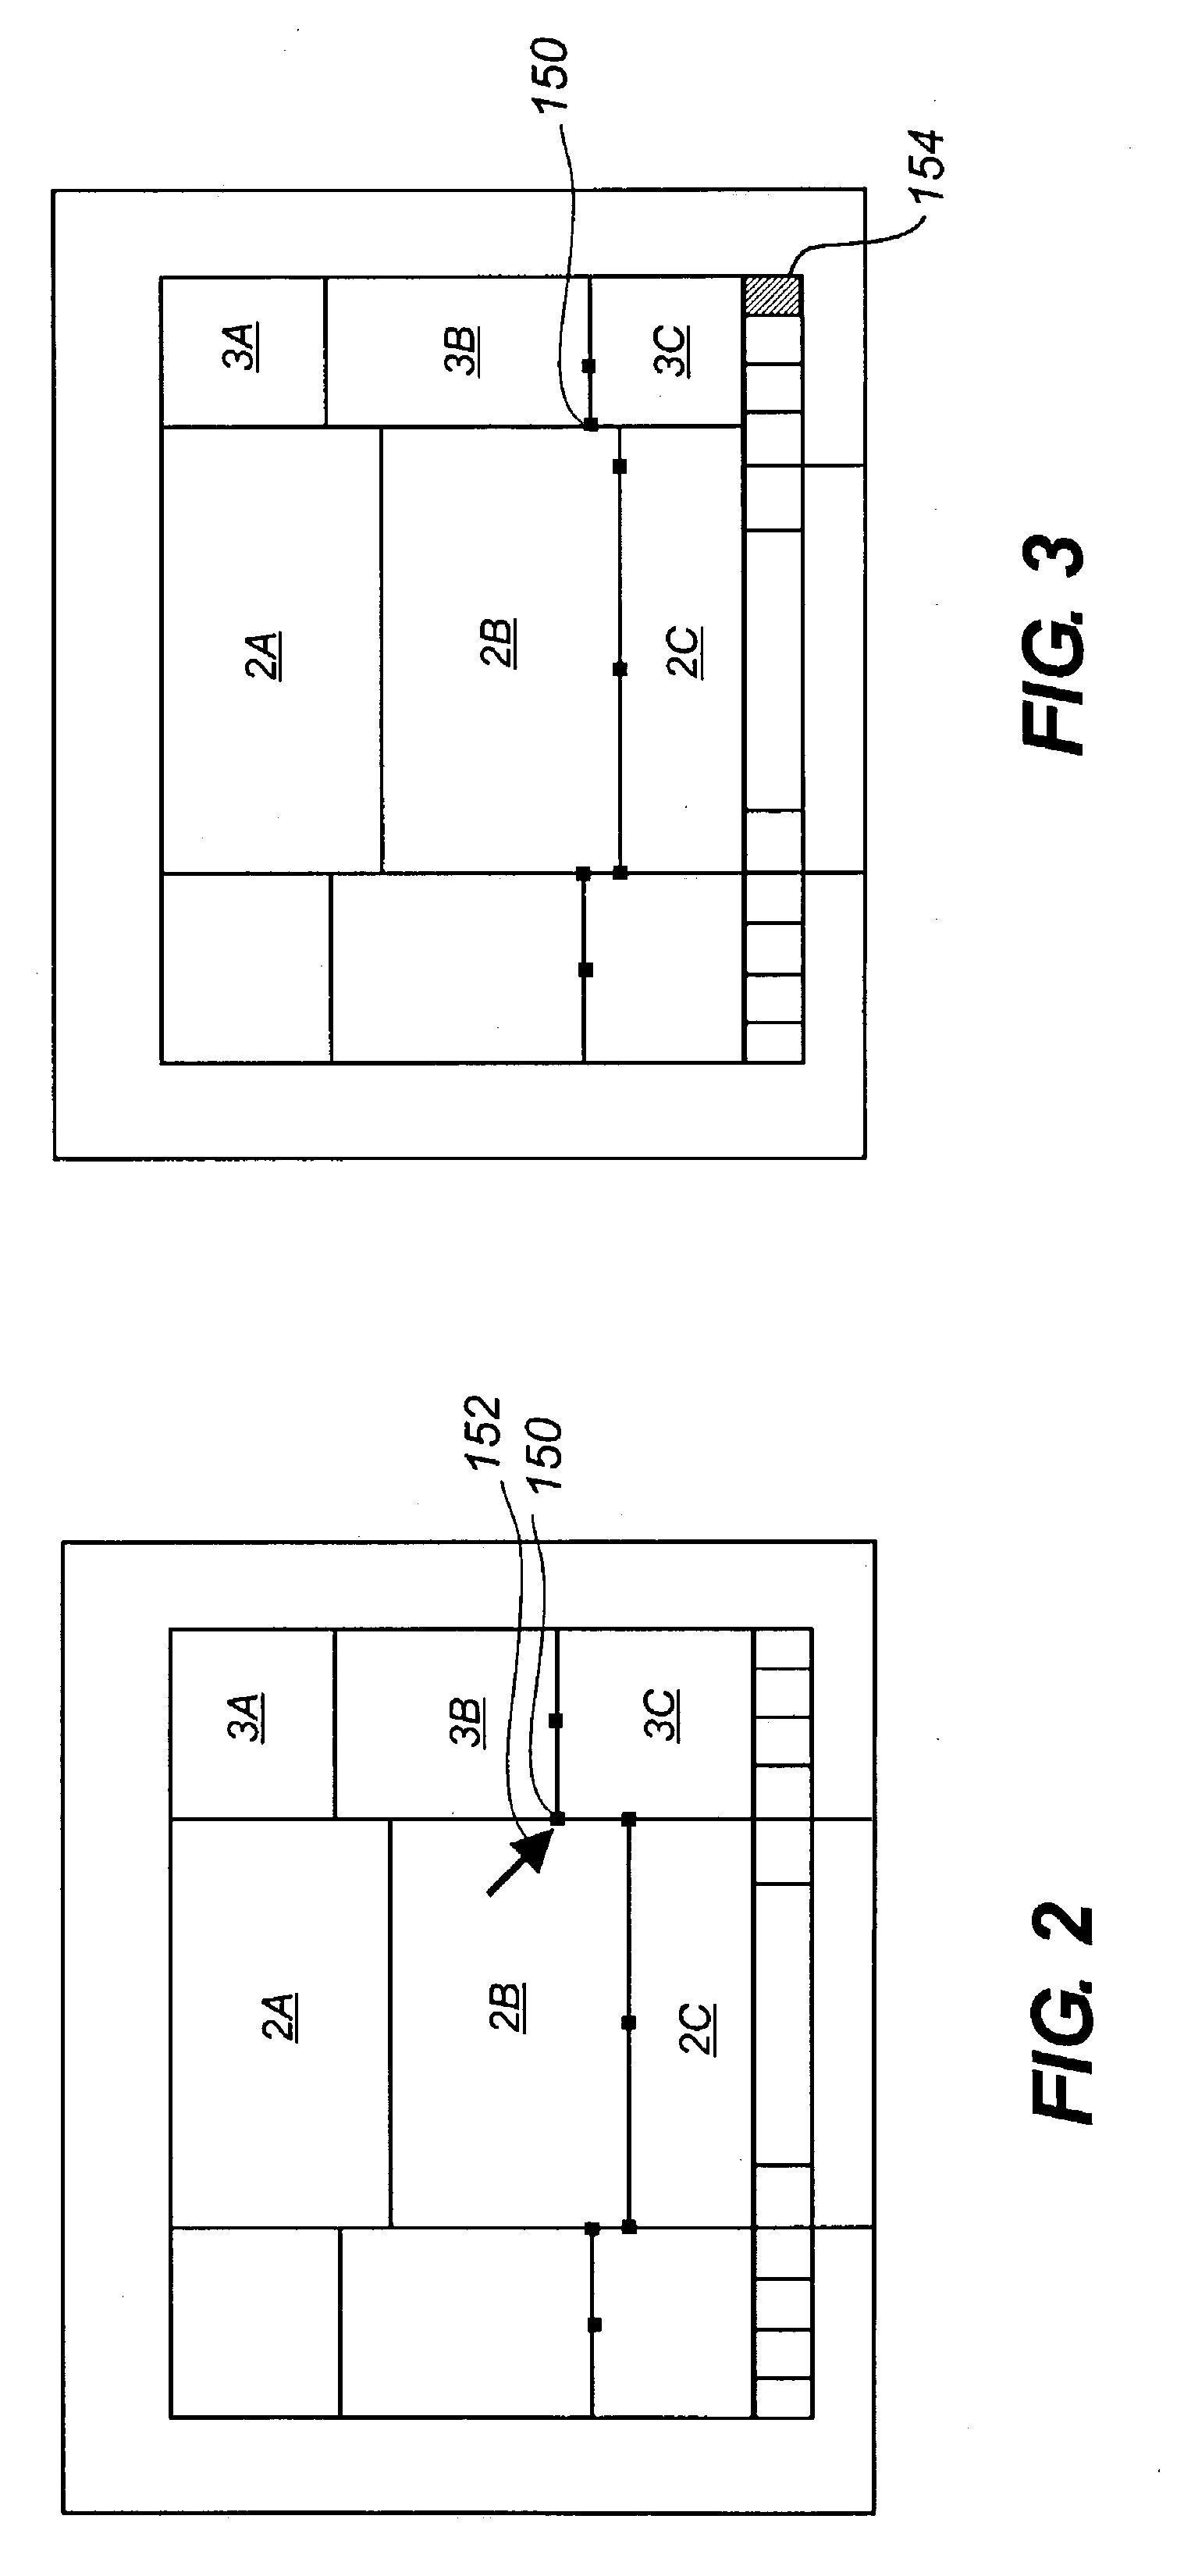 System and method for customizing multiple windows of information on a display